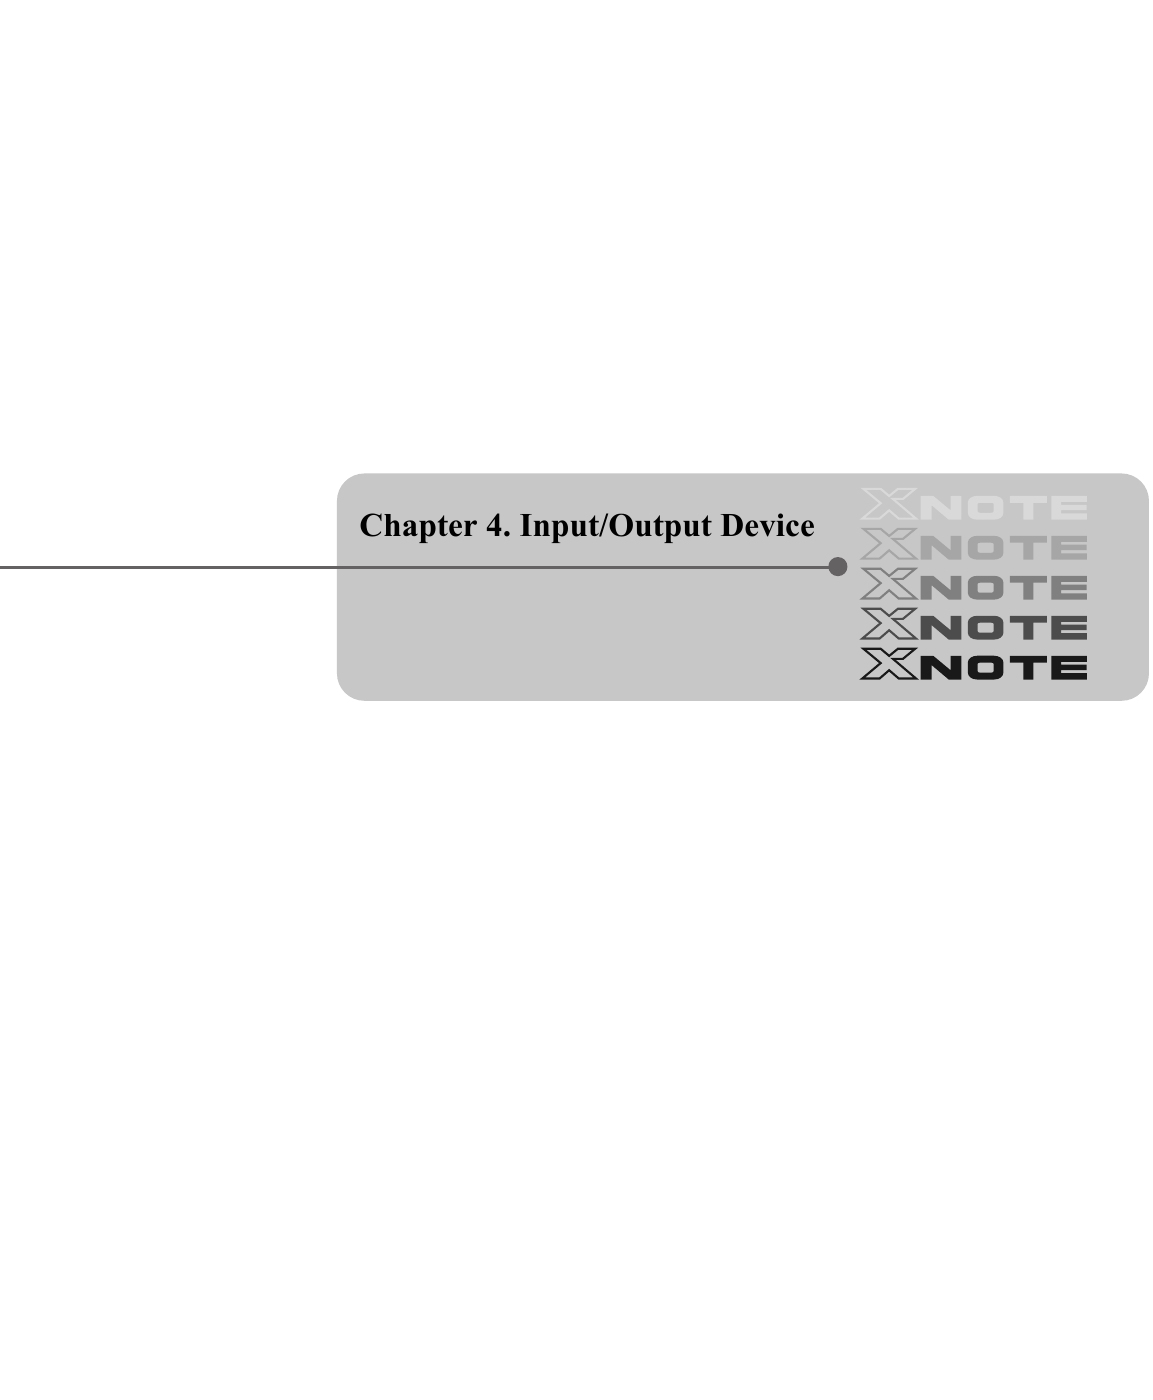 Chapter 4. Input/Output Device